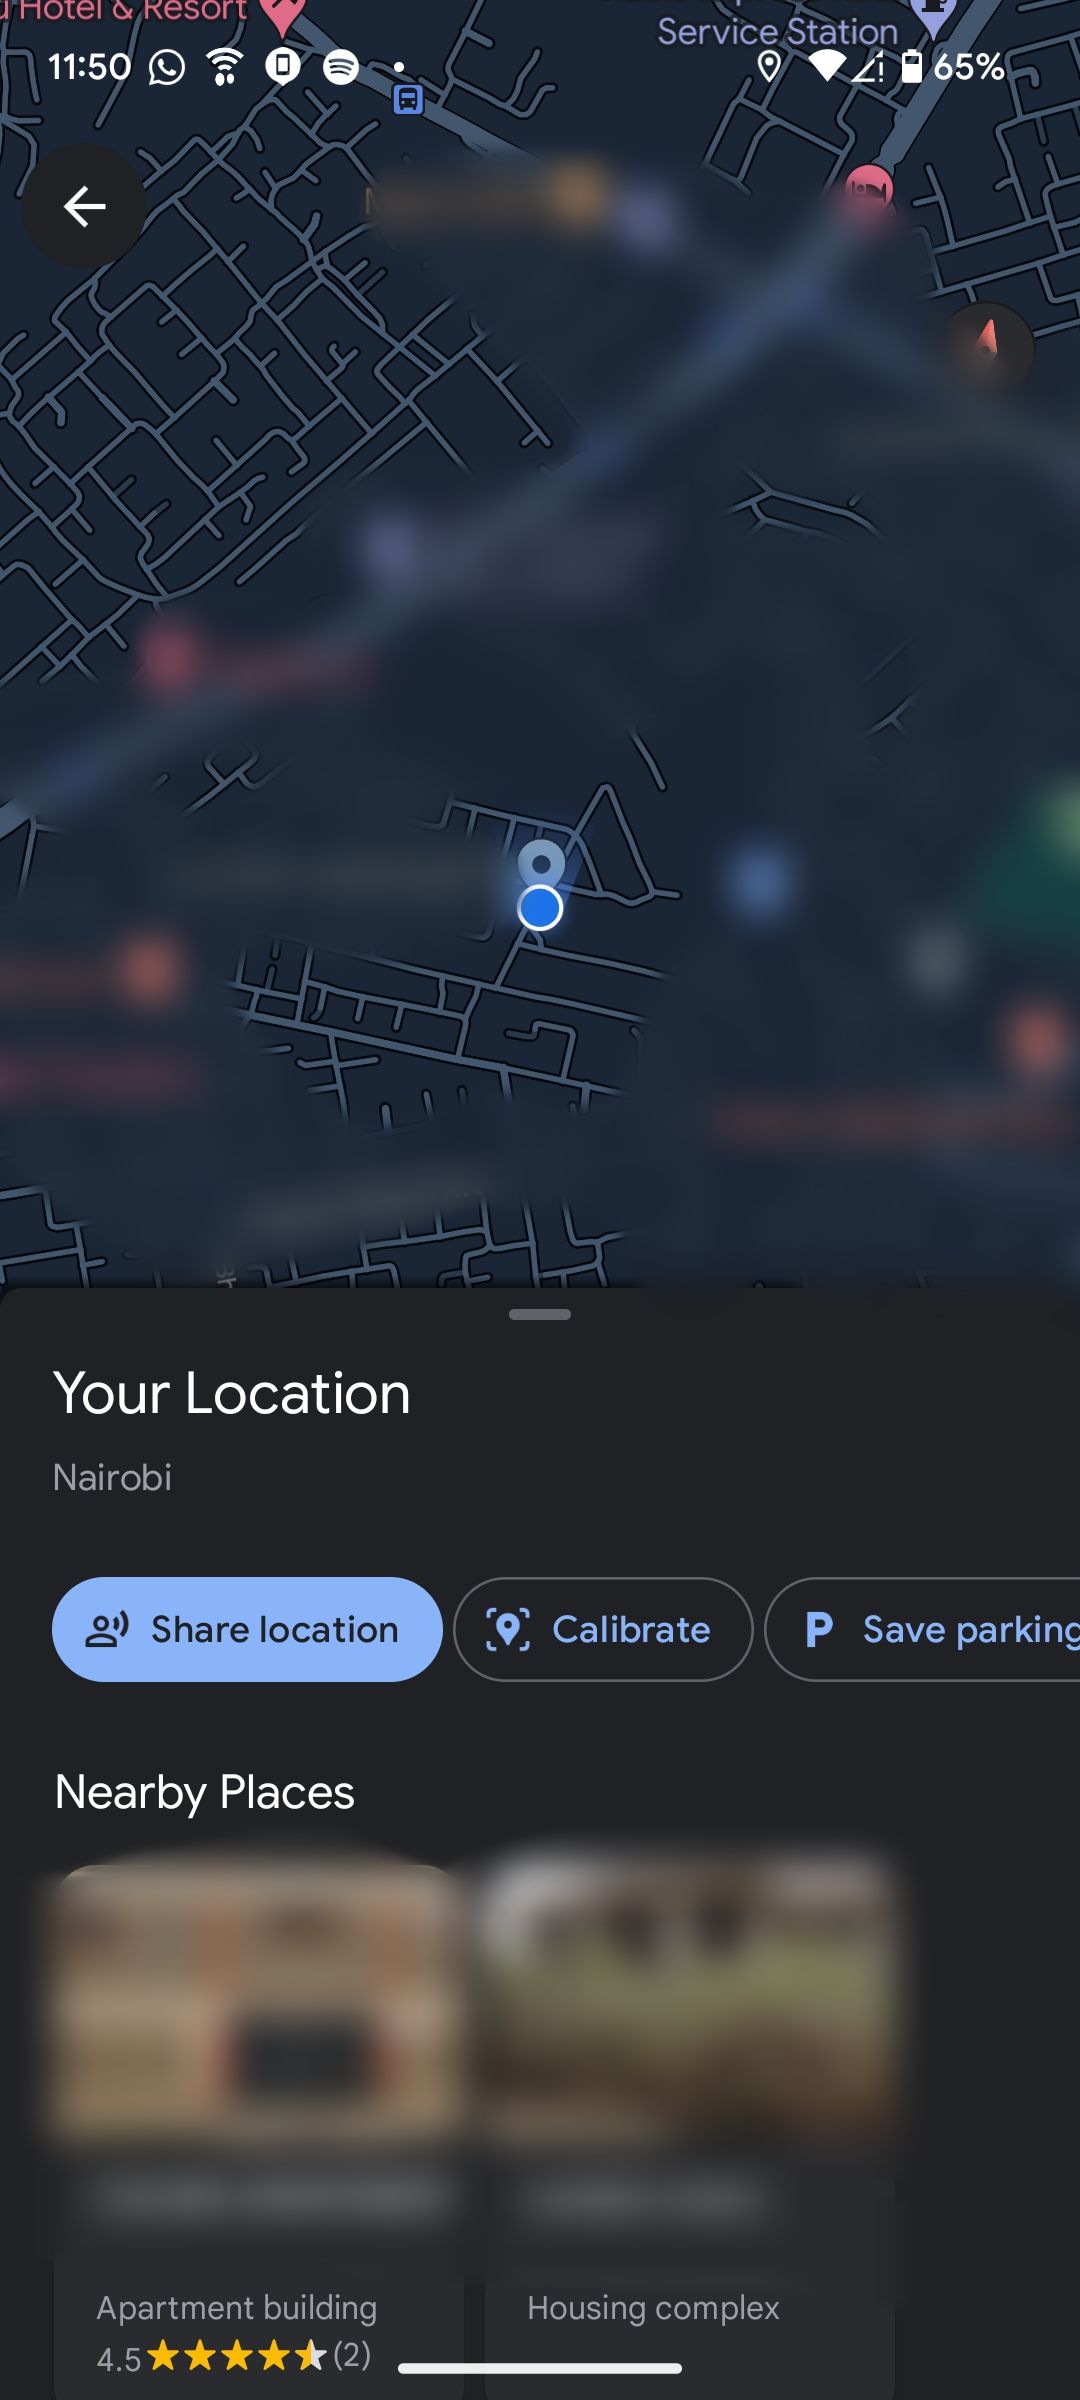 Location sharing option in Google Maps